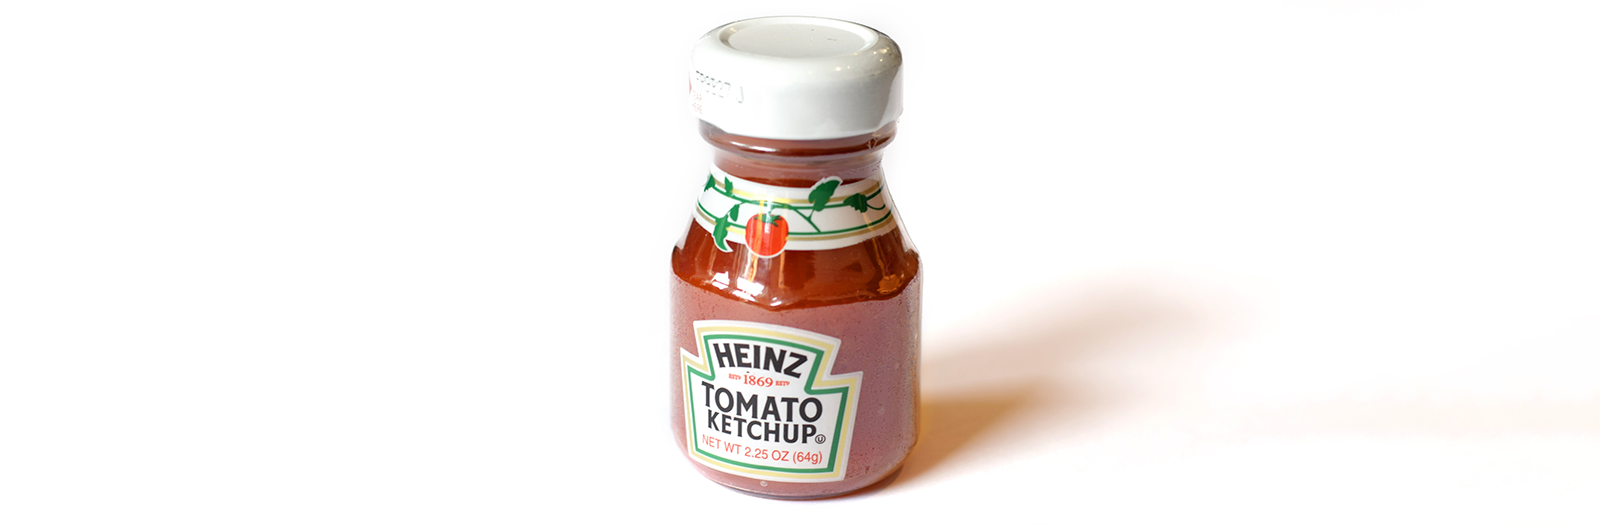 Small Heinz ketchup in glass bottle on white table